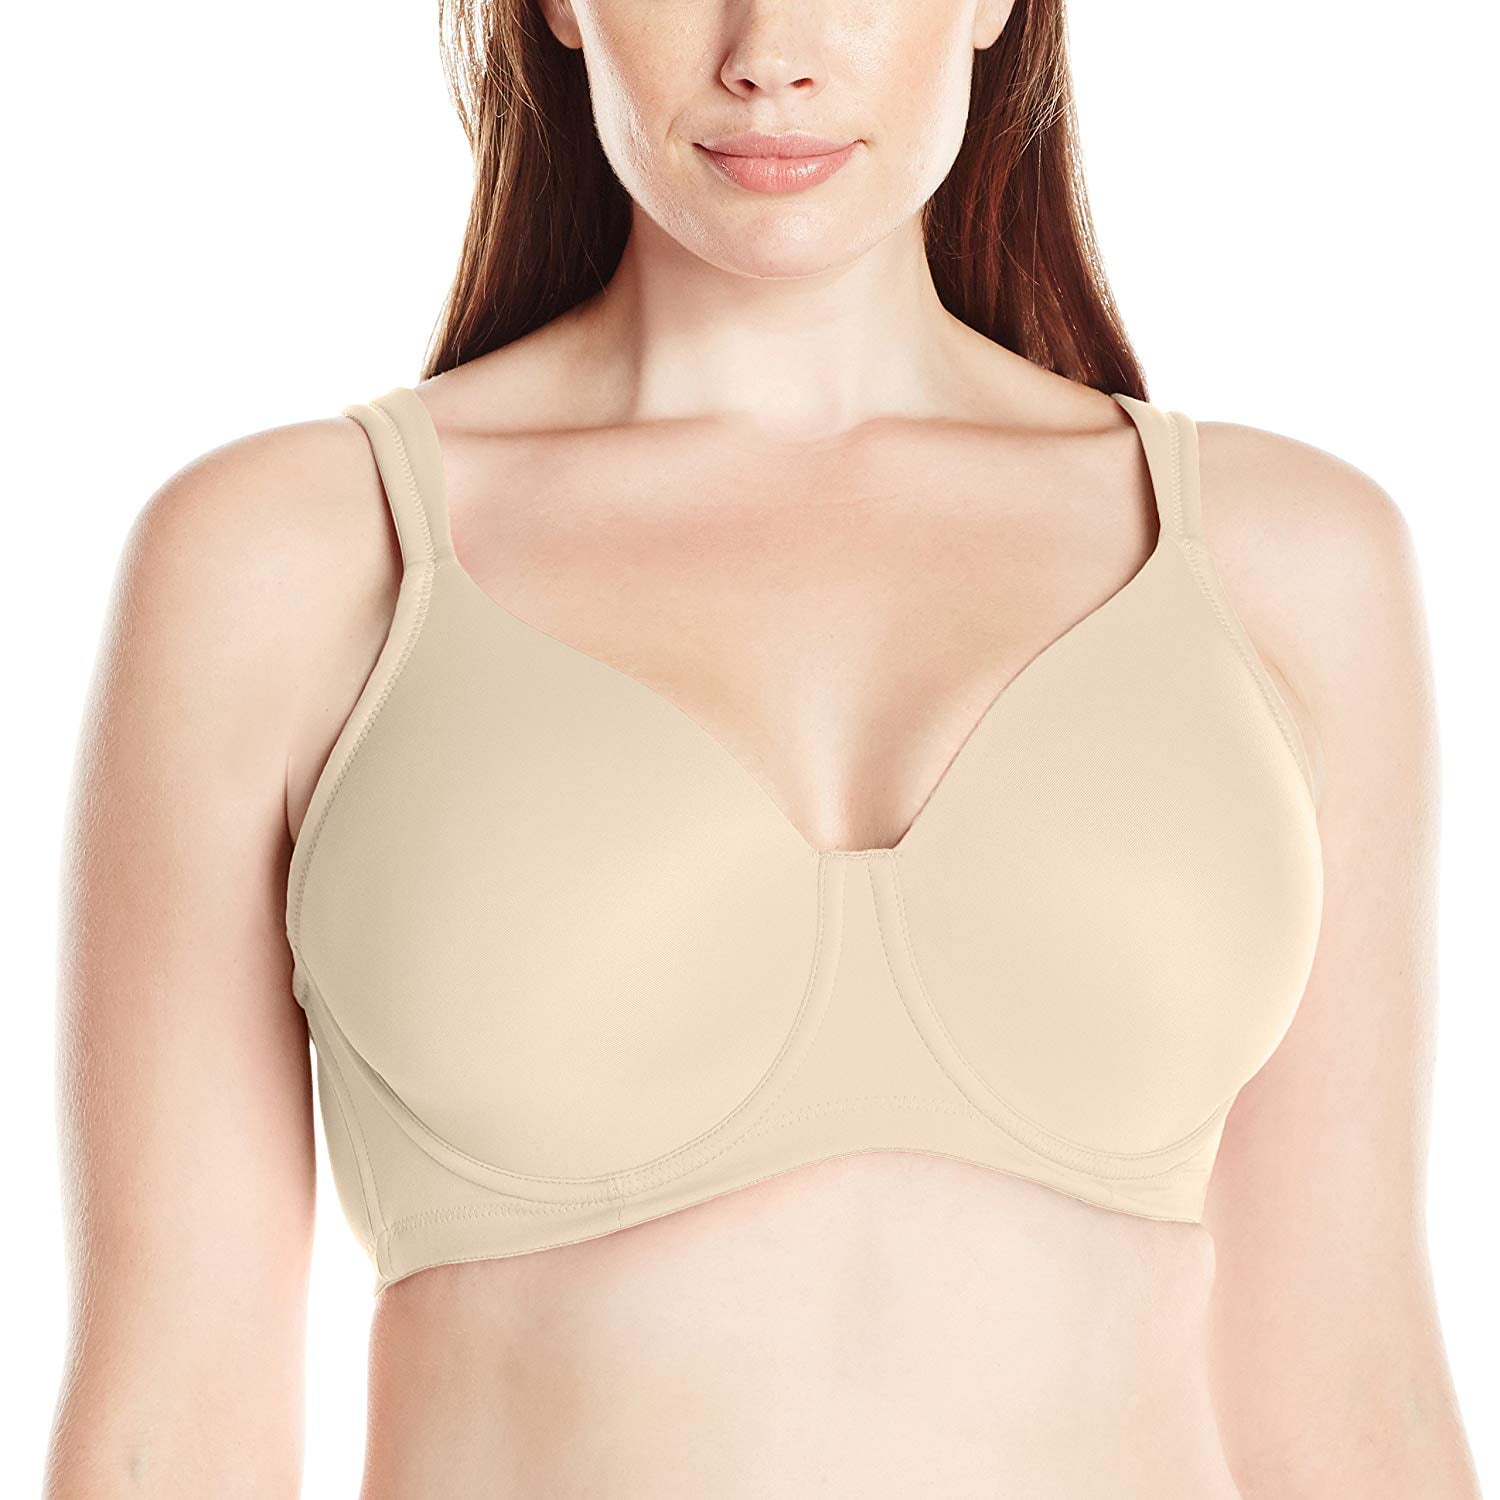 LEADING LADY Nude Smooth Contour Bra, US 46A, UK 46A, NWOT 